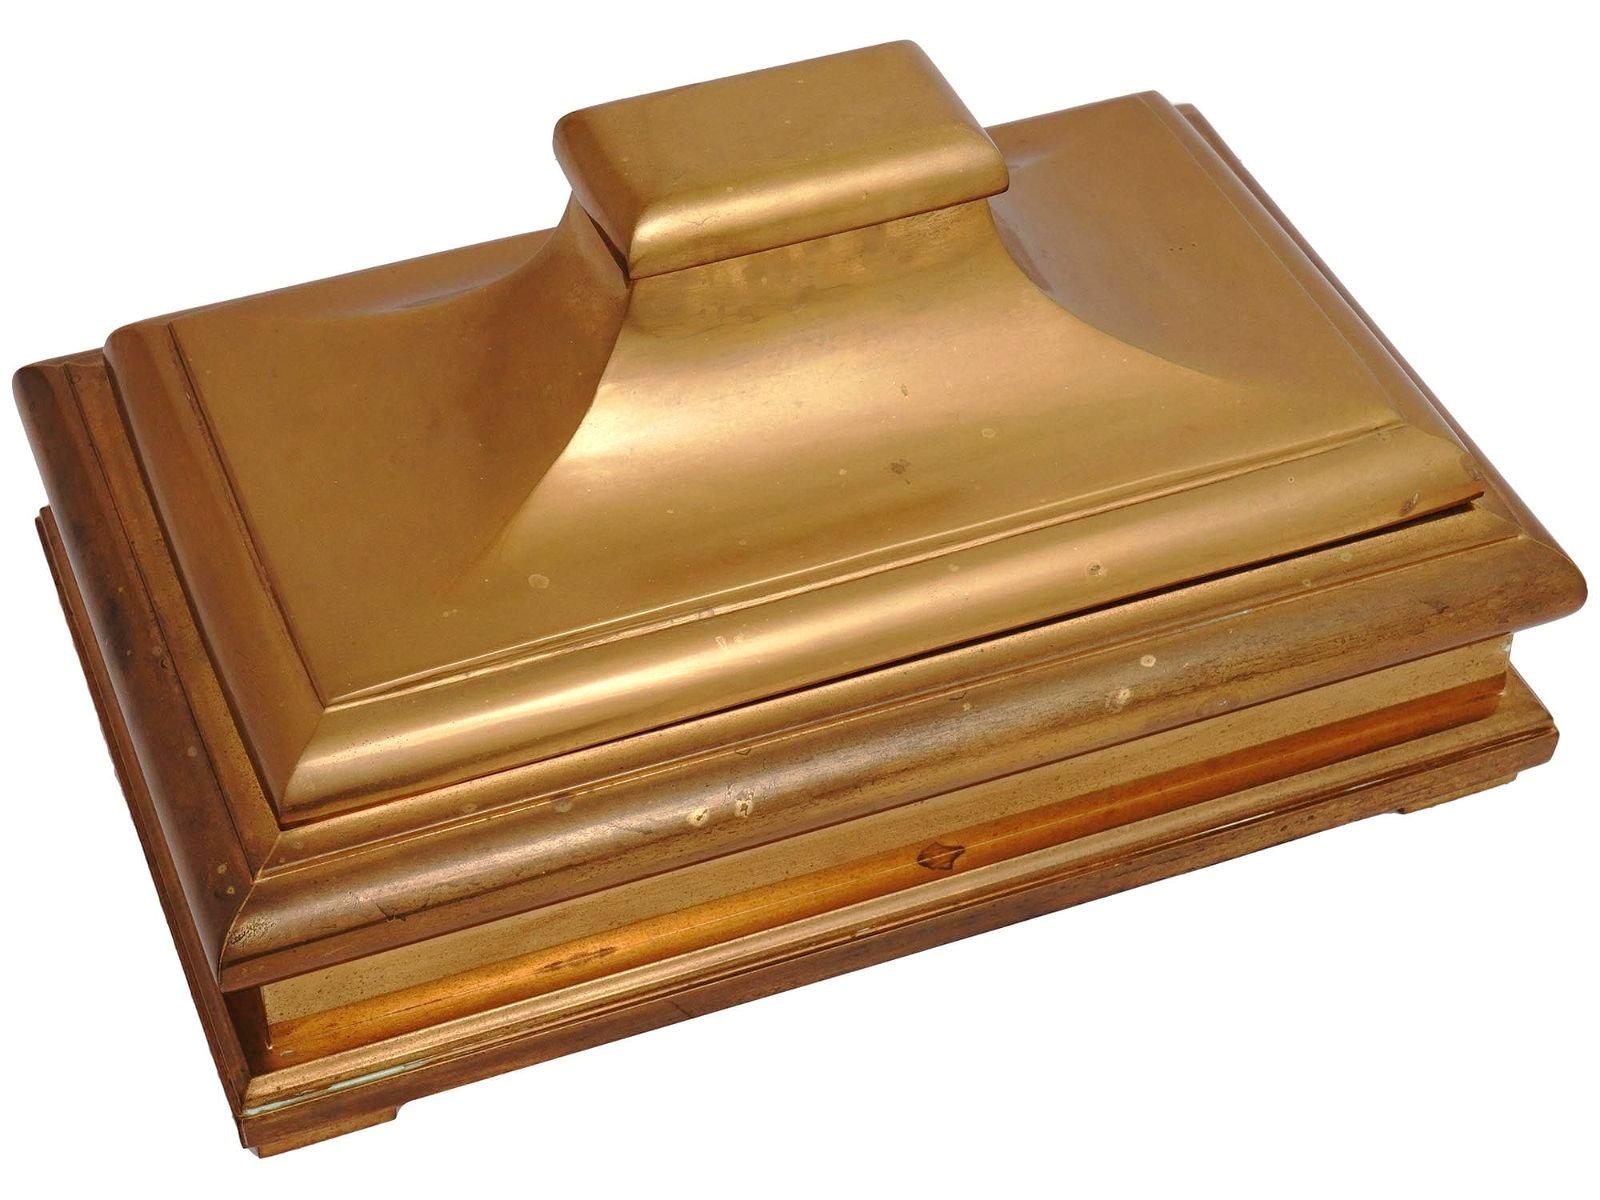 Large, mid-century modern solid brass jewelry casket by Chapman measuring 15 1/4 by 8 1/4 by 9 1/2 inches.  Estate-fresh, in very good condition with oxidation and rubbing wear, and would look amazing with a gentle polishing.